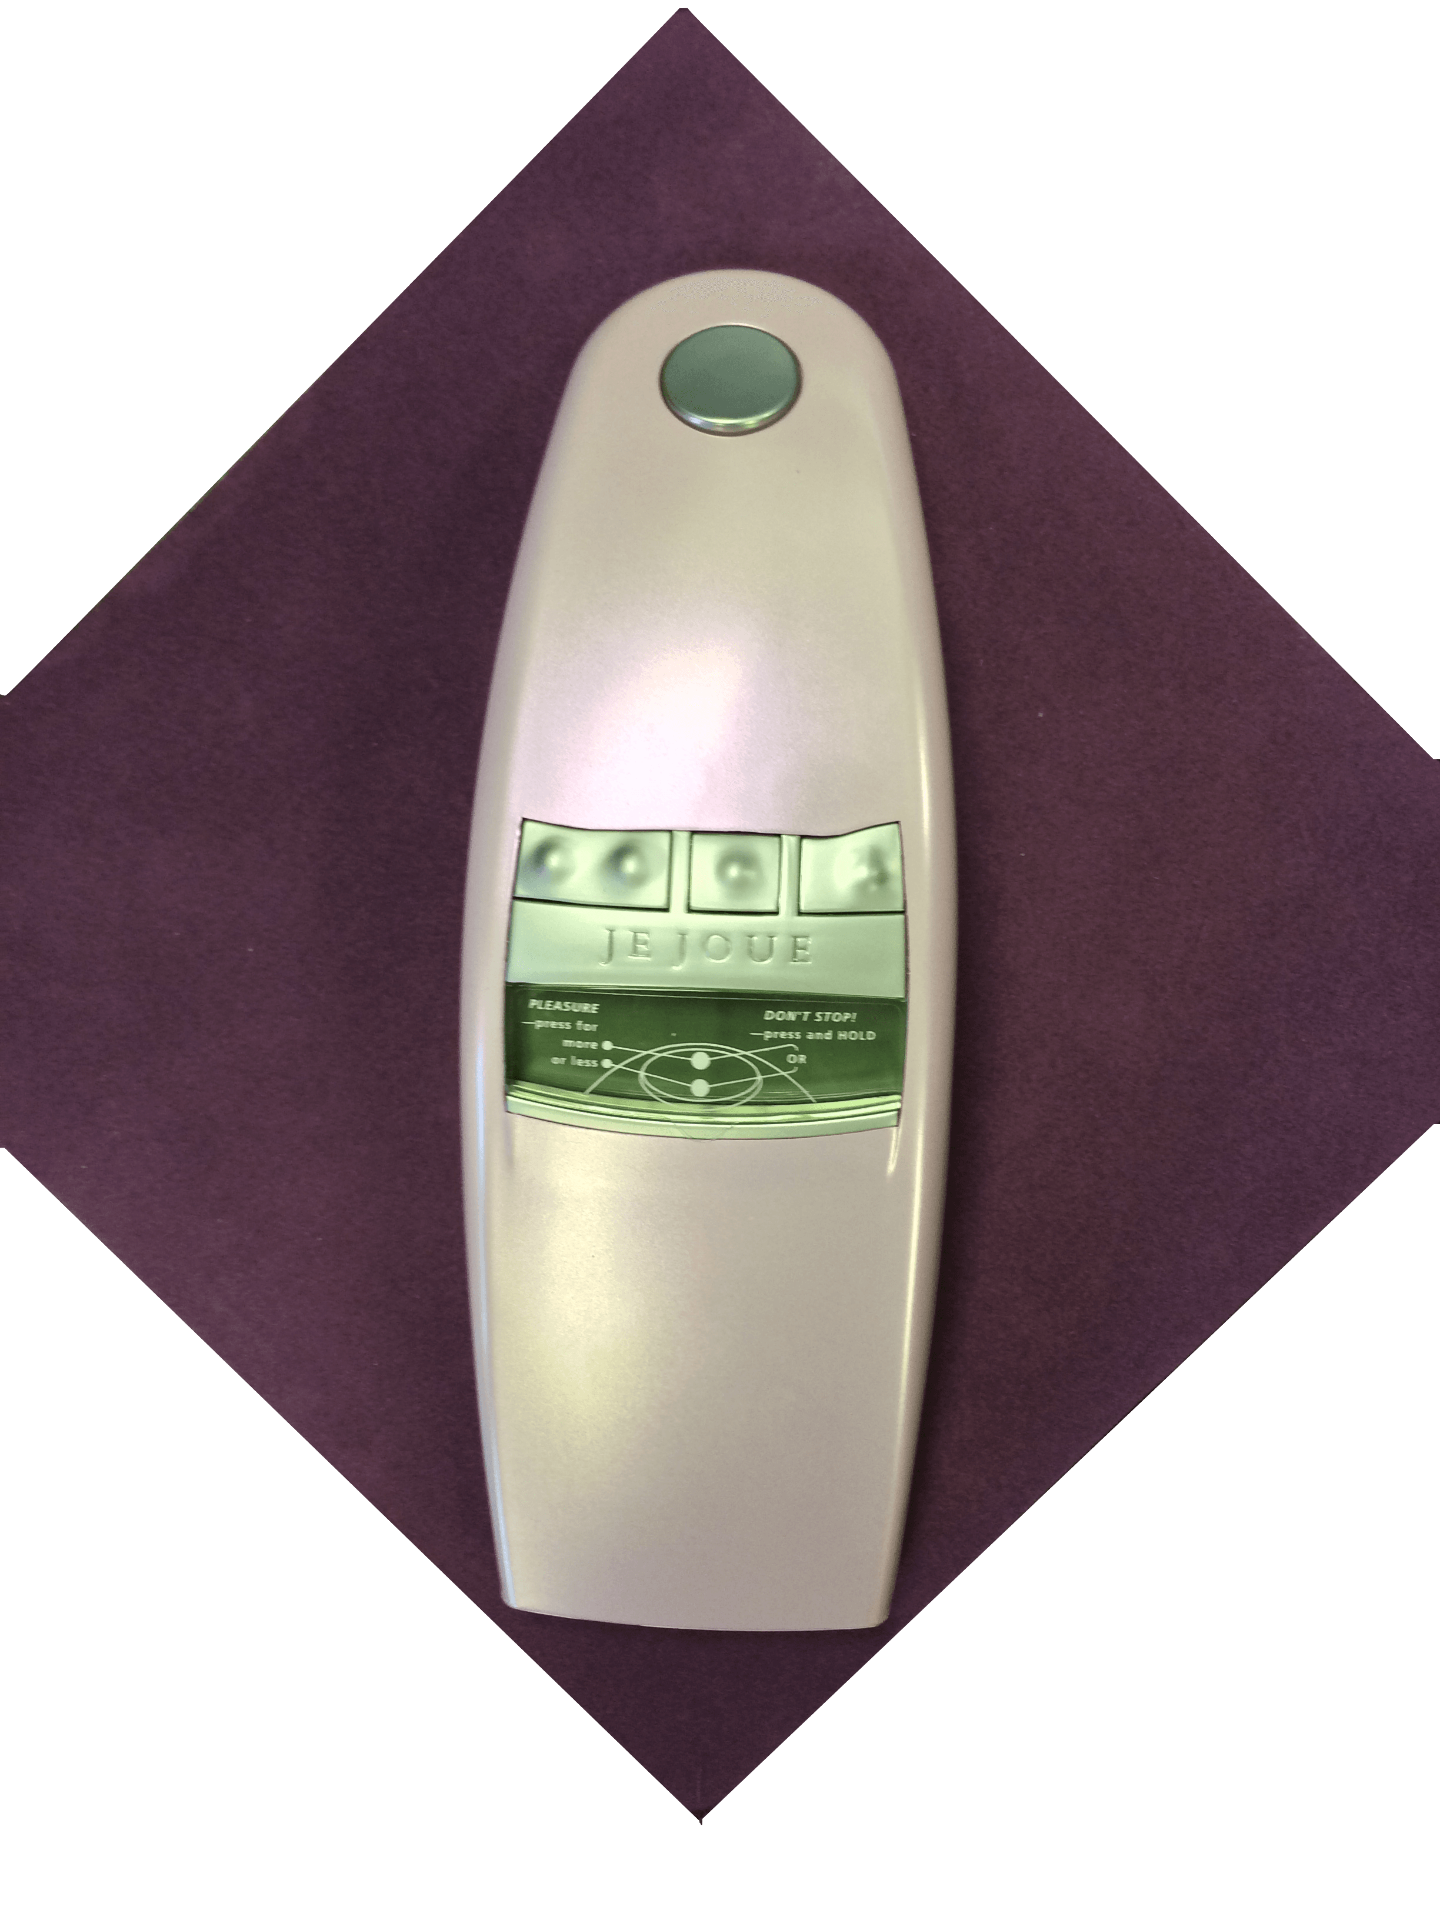 5 x Je Joue Sensual Intelligence with PleasureWare Software & Grooves. RRP £349.99 - Image 2 of 6